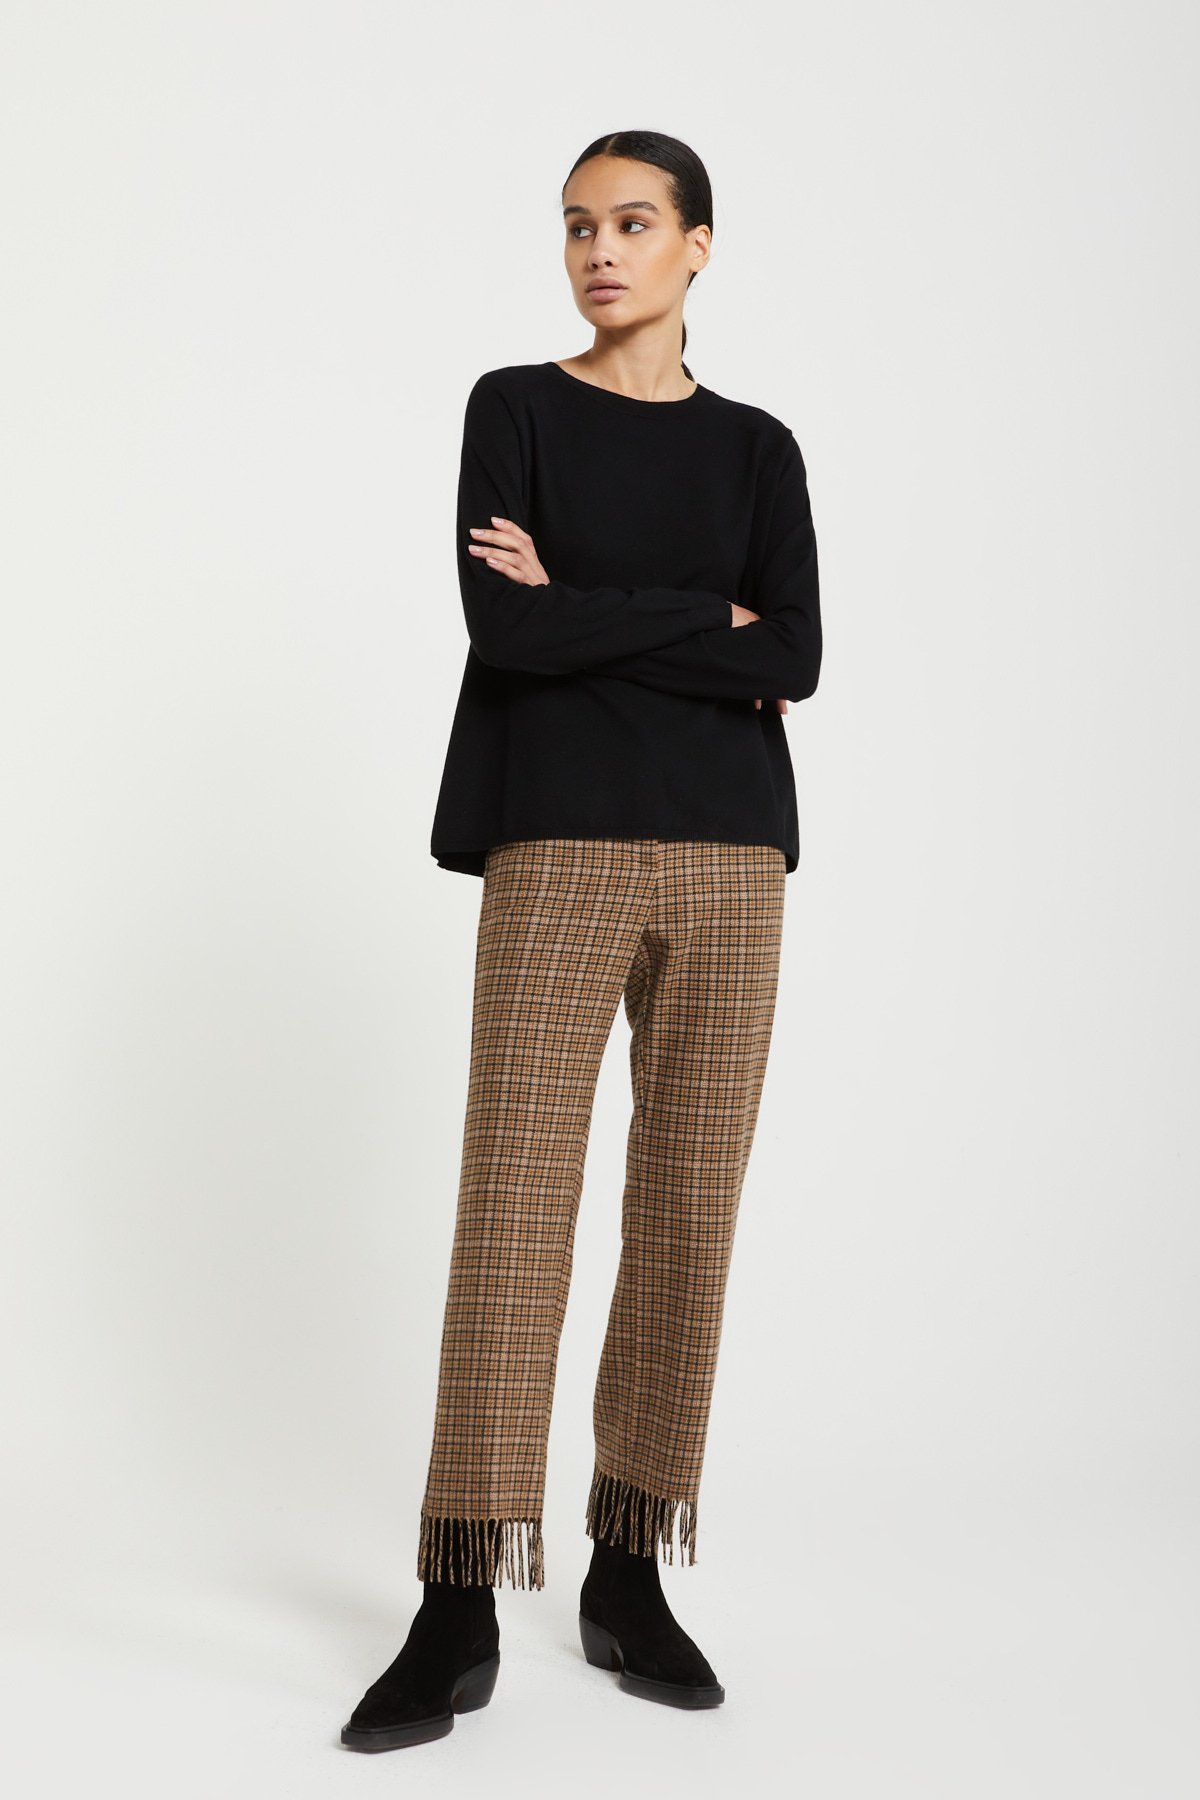 Jumper with rounded neck